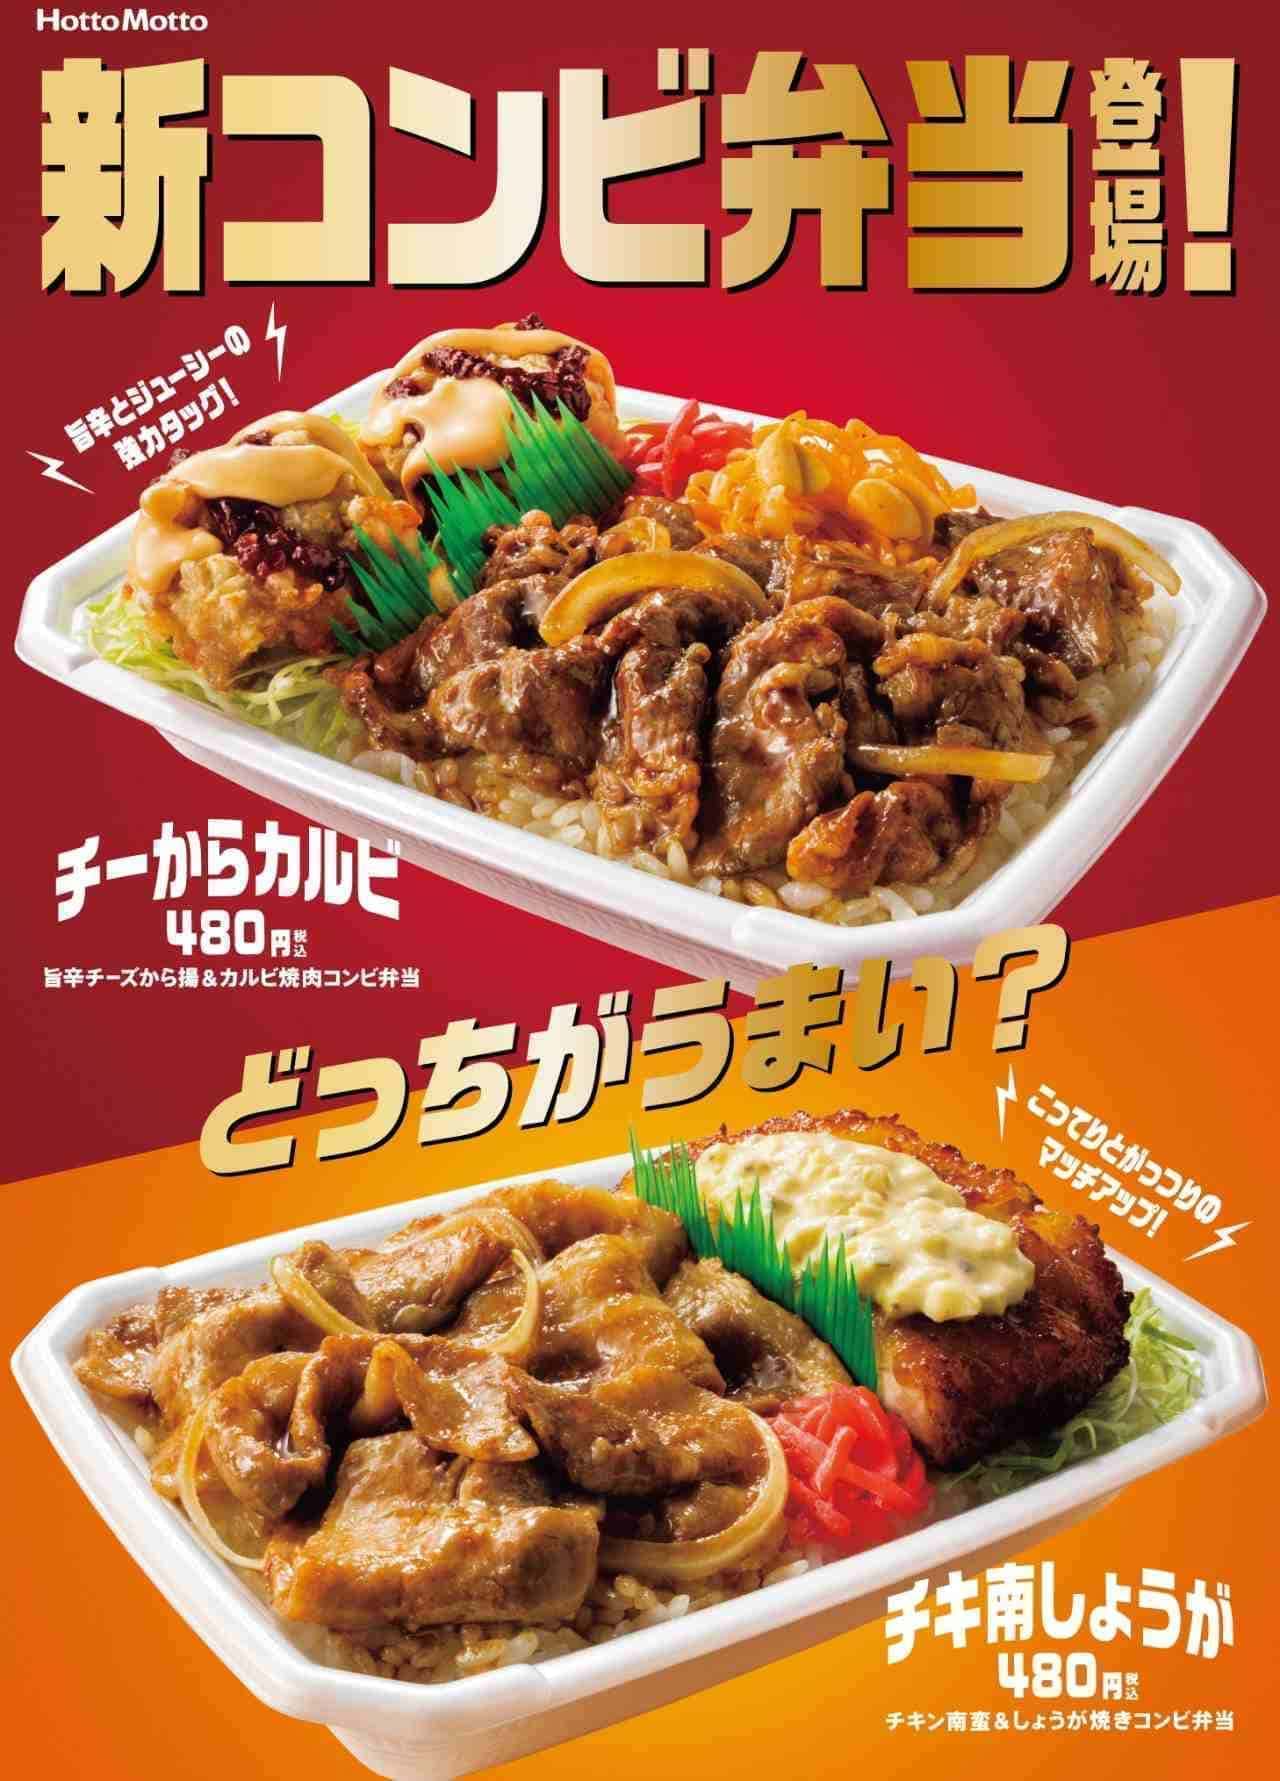 Hotto Motto "Fried with spicy cheese & rib grilled meat combination lunch" and "Chicken nanban & ginger grilled combination lunch"